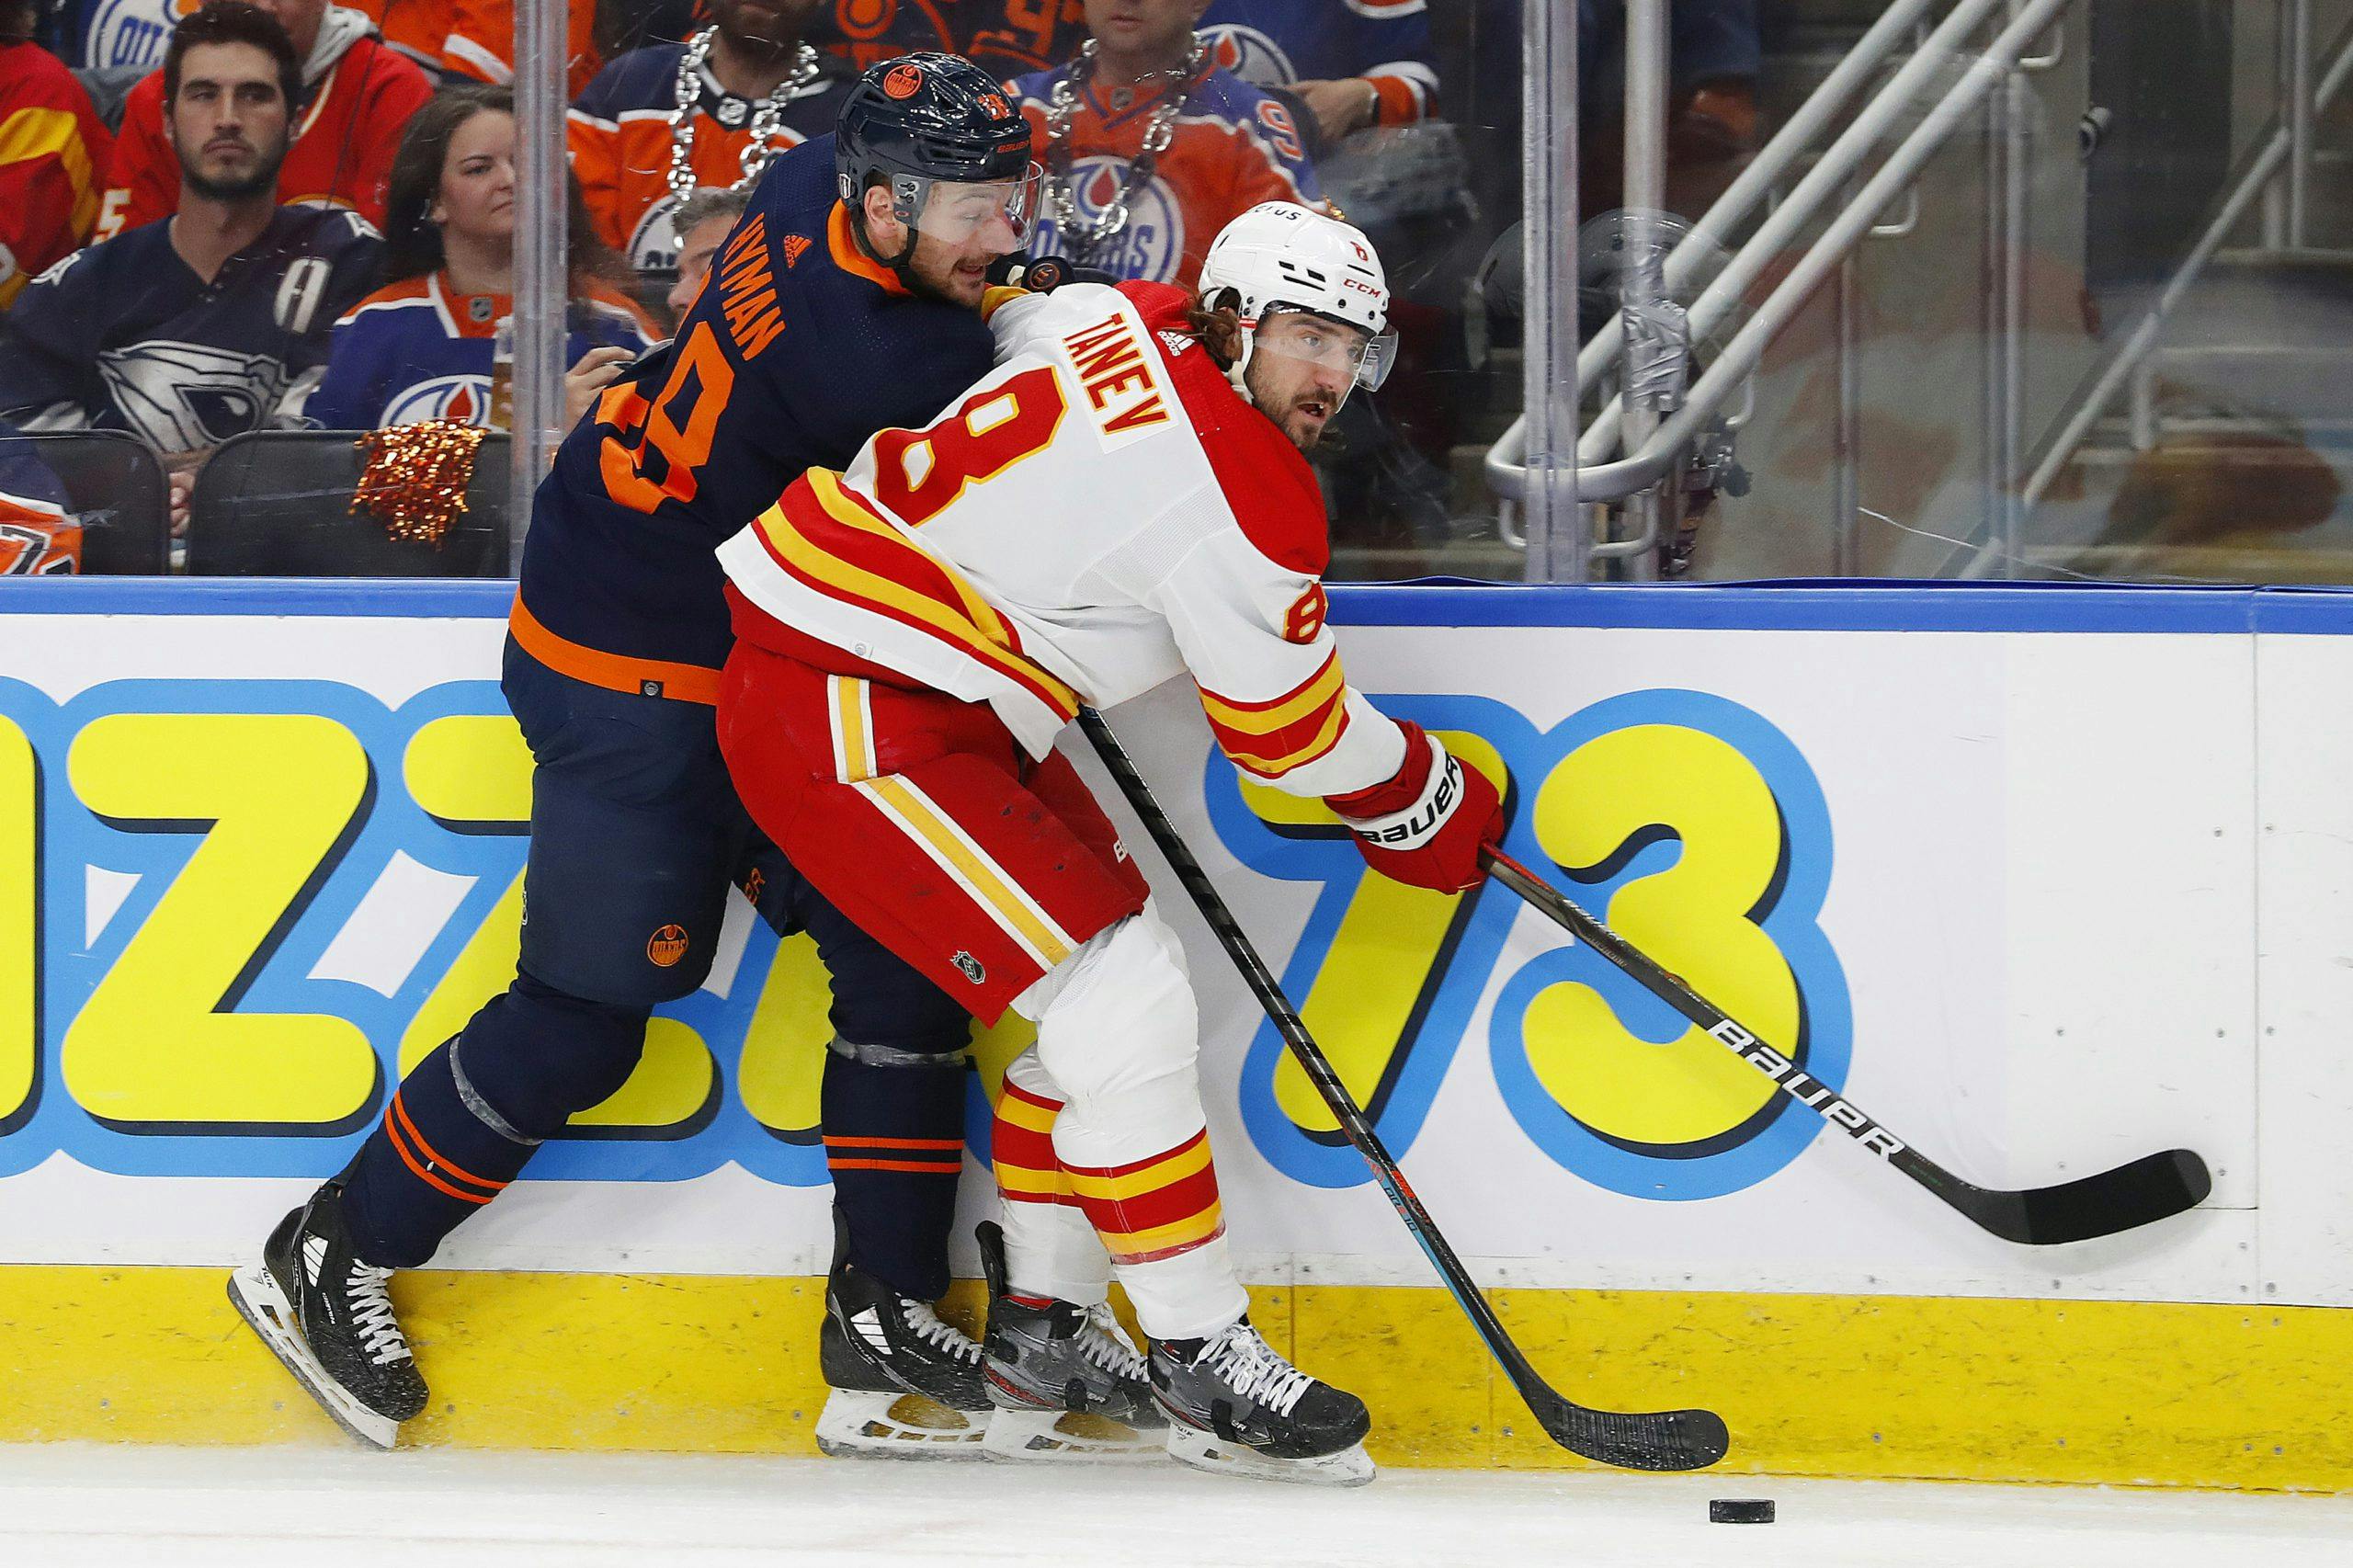 Calgary Flames defenceman Chris Tanev set for surgery after playing through torn dislocated, separated shoulder